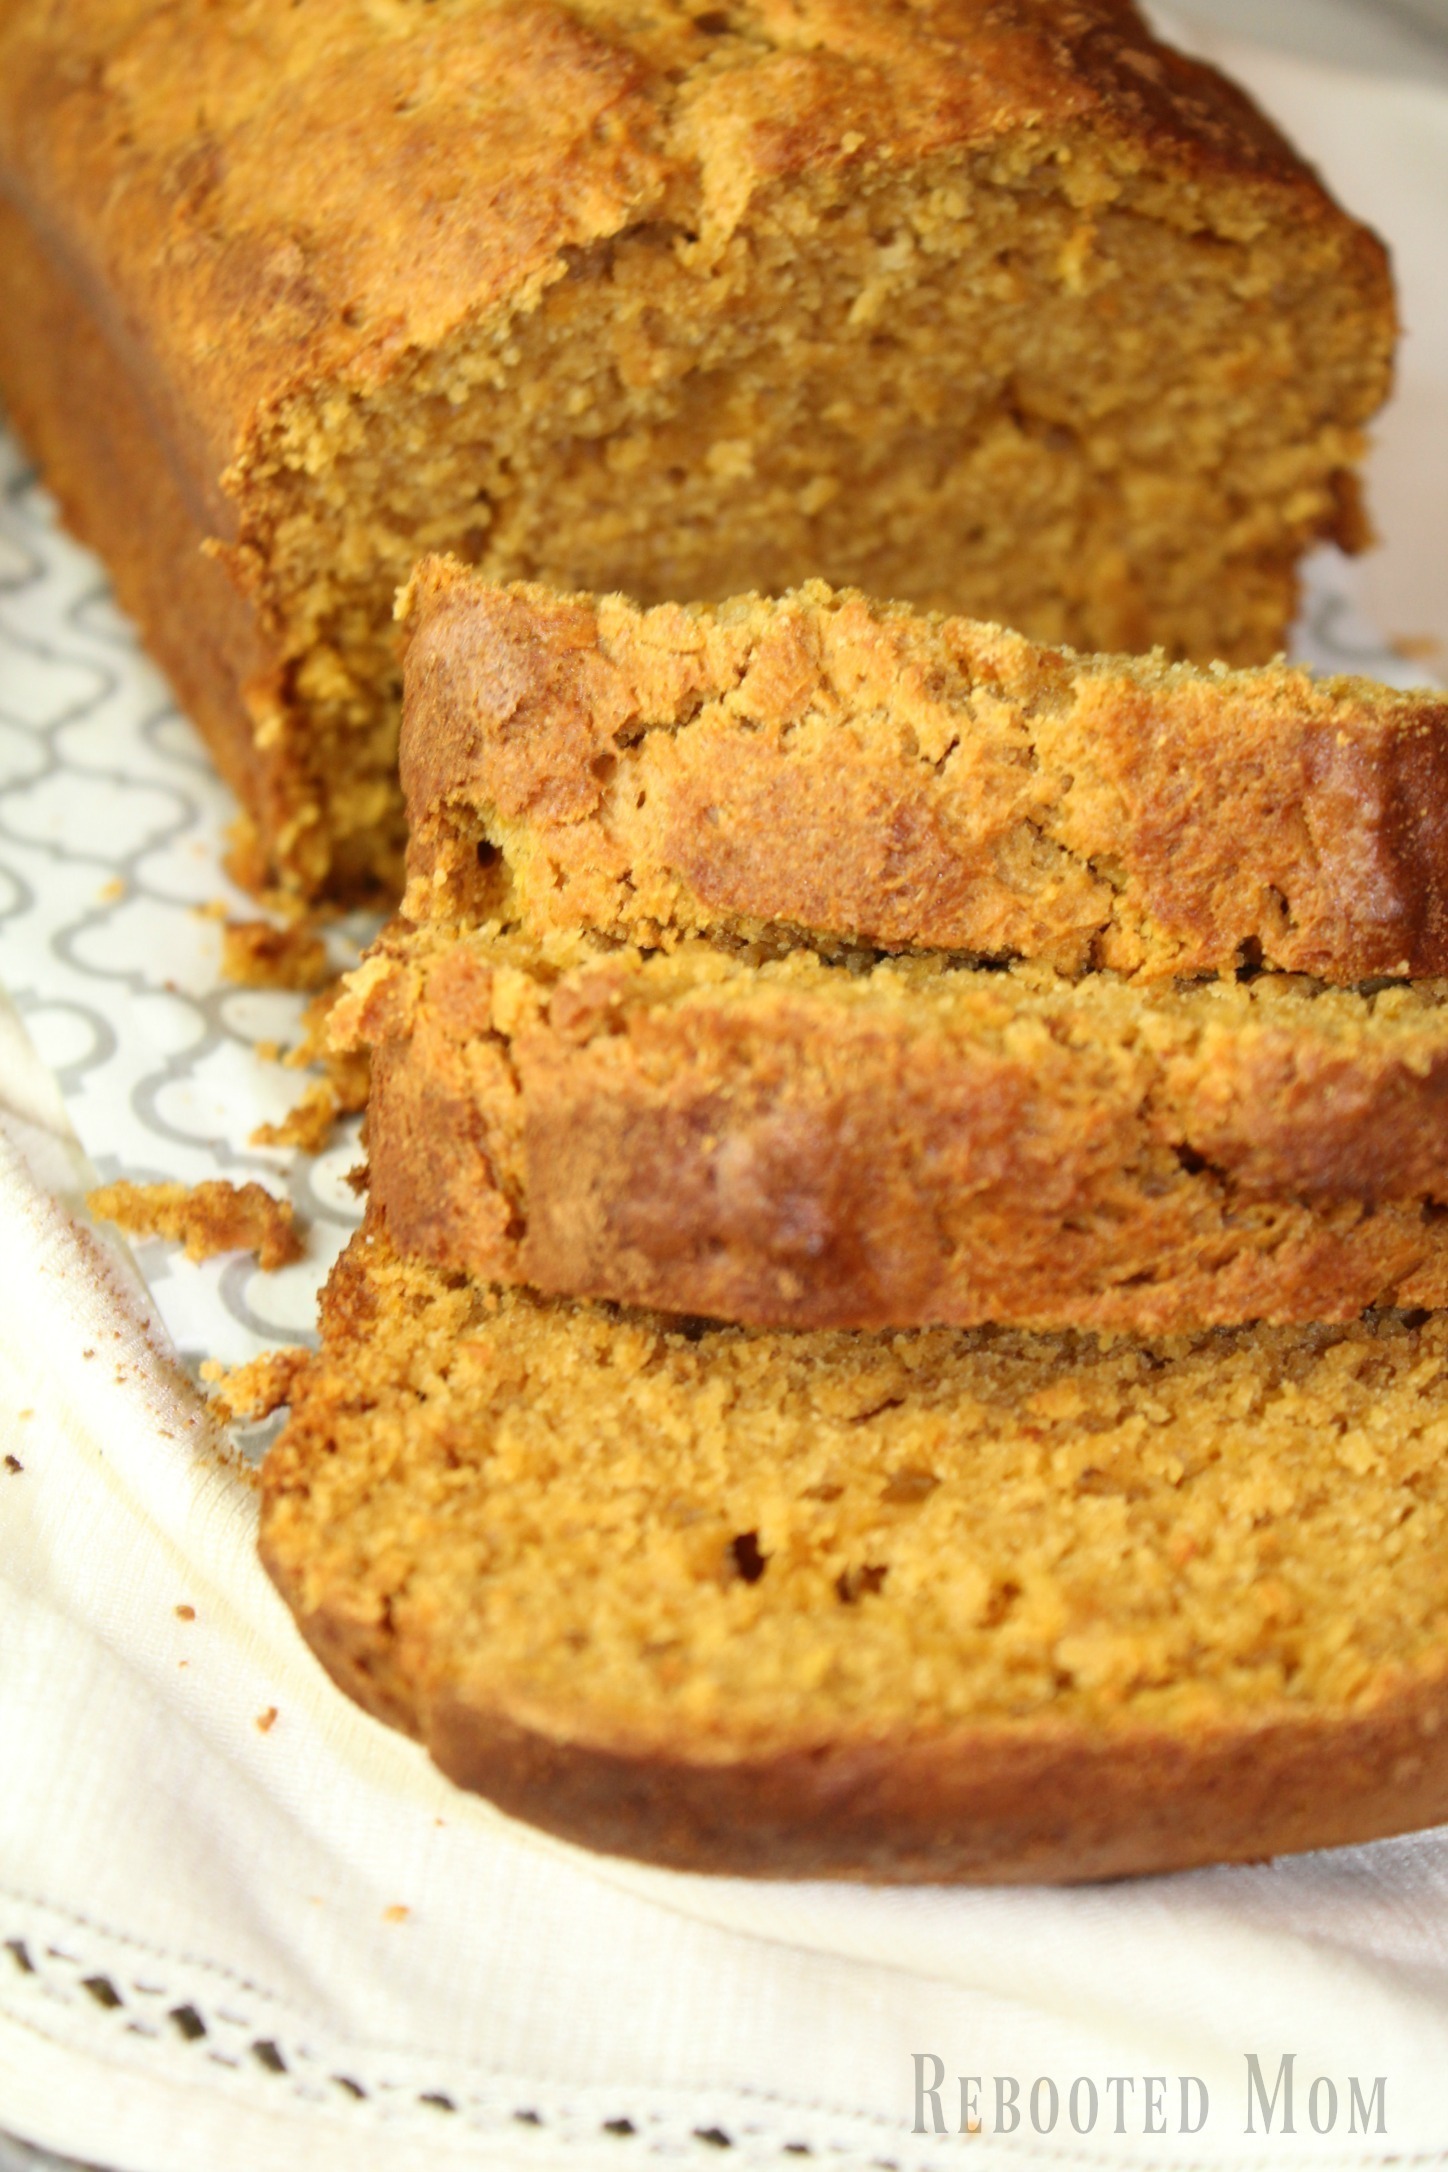 Our maple sweet potato bread blurs the line between breakfast and dessert & combines subtle spices of maple syrup, and sweet potatoes into one yummy loaf.